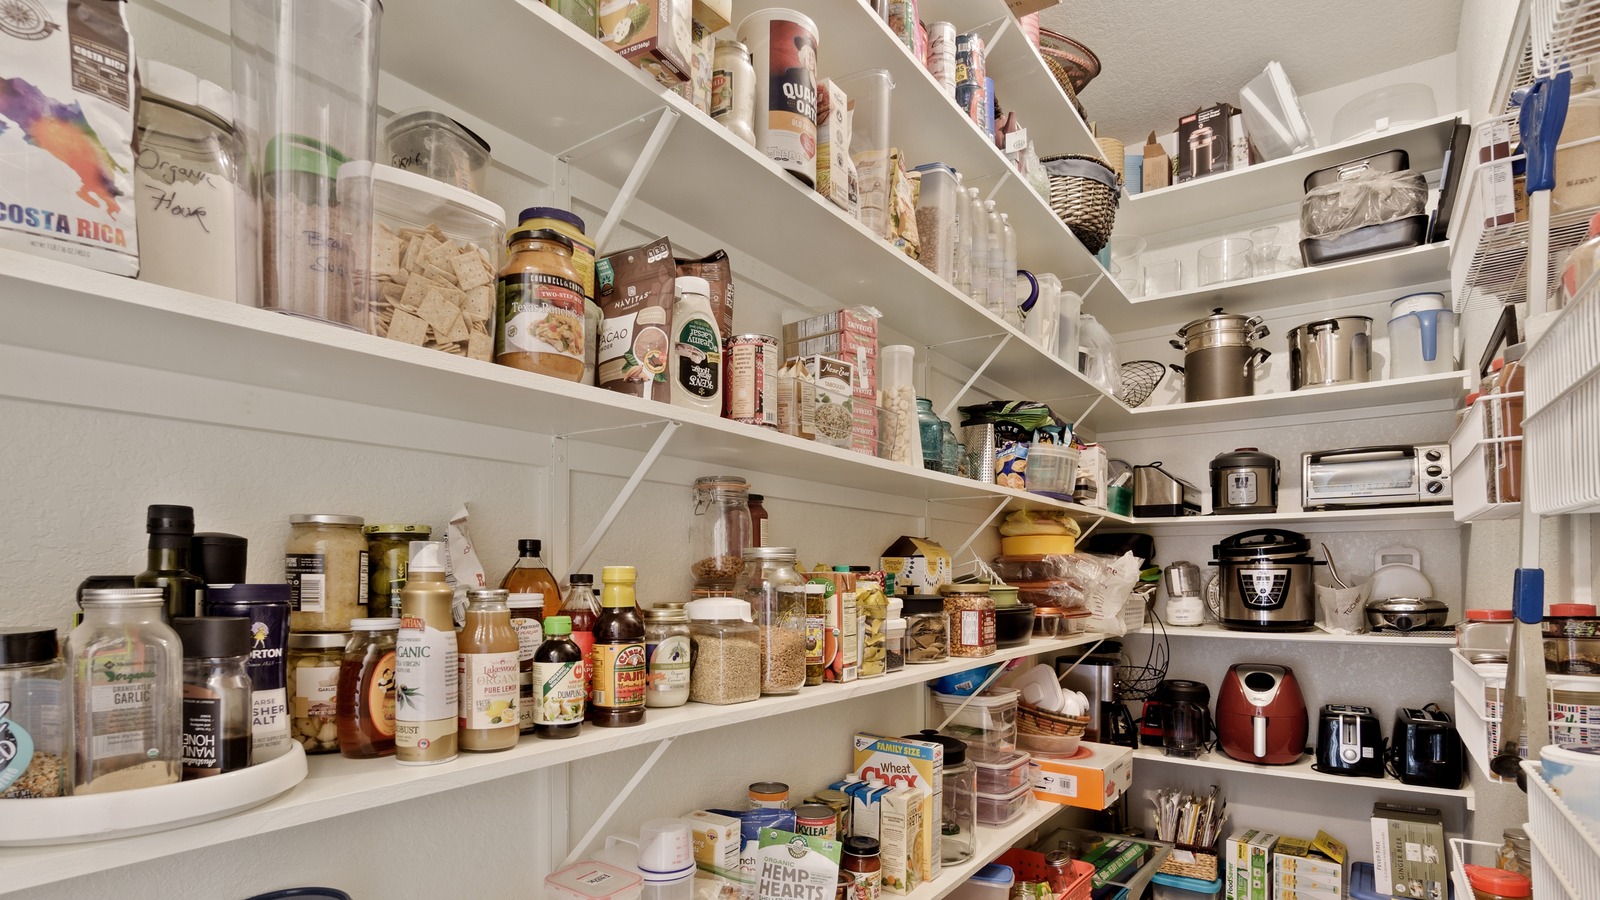 https://www.housedigest.com/img/gallery/revolutionize-your-pantry-storage-with-this-easy-ikea-karaff-hack/l-intro-1704142005.jpg